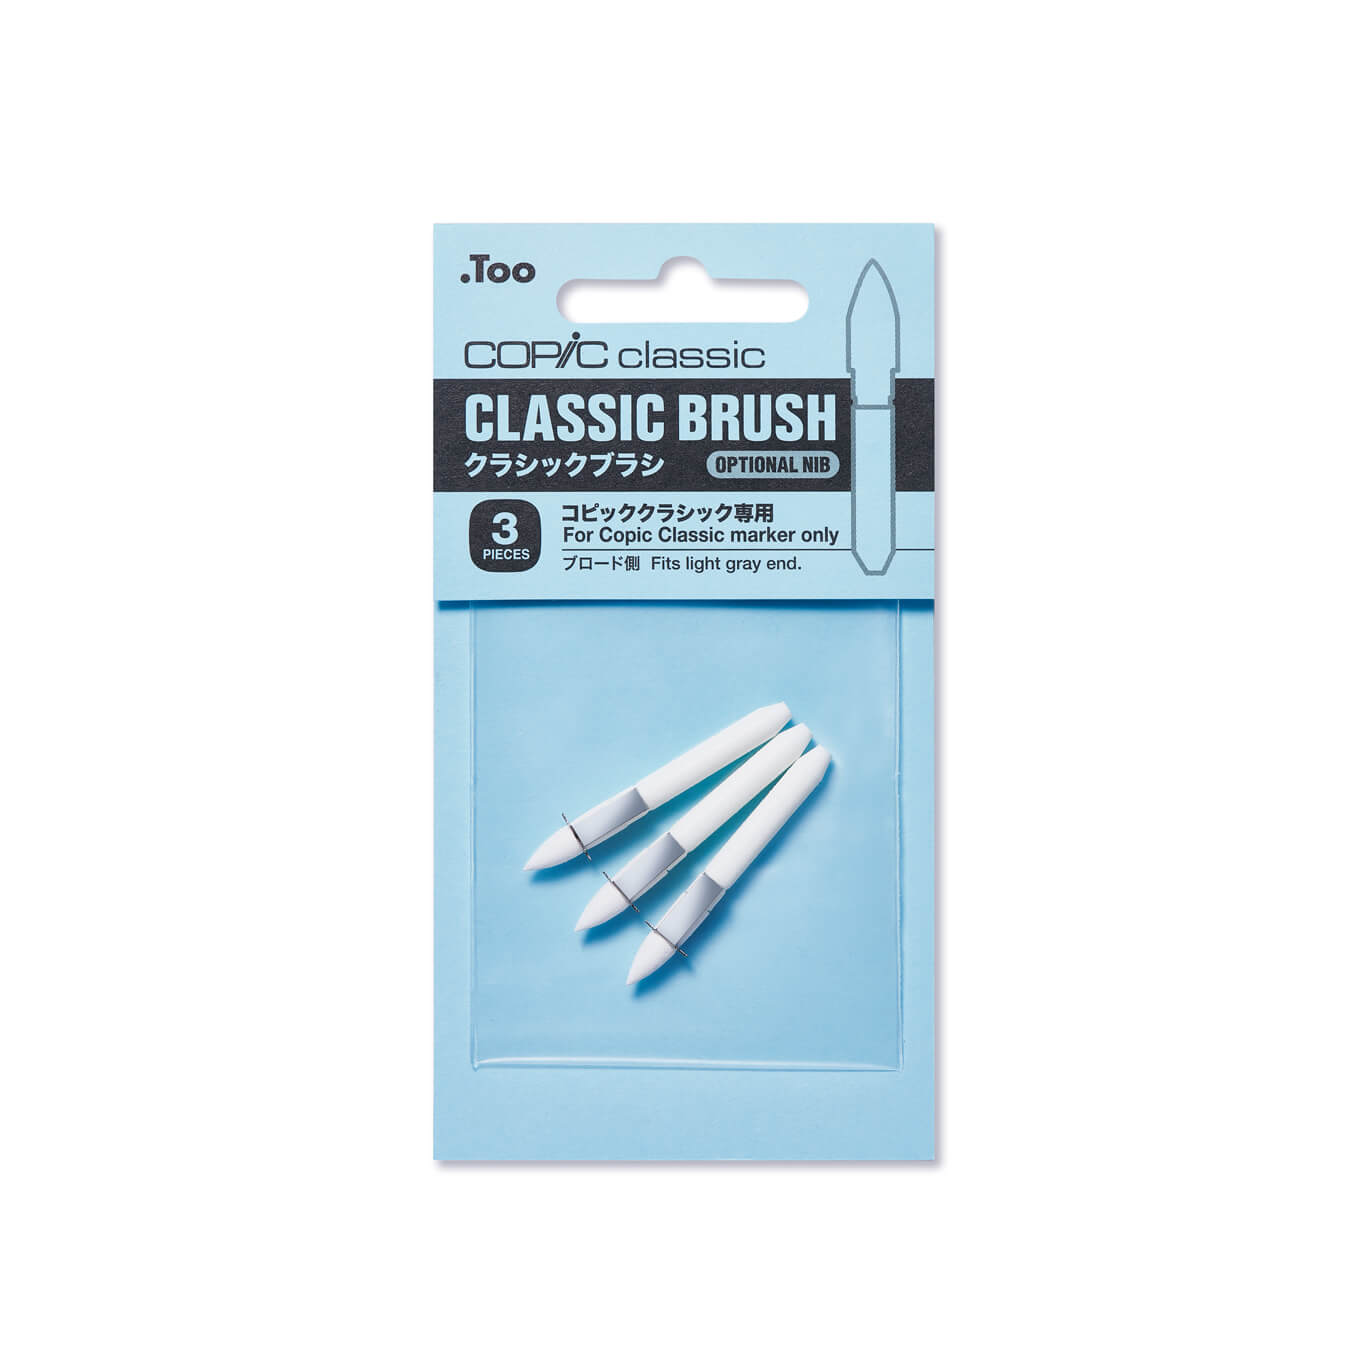  Copic Marker with Replaceable Nib, Clear